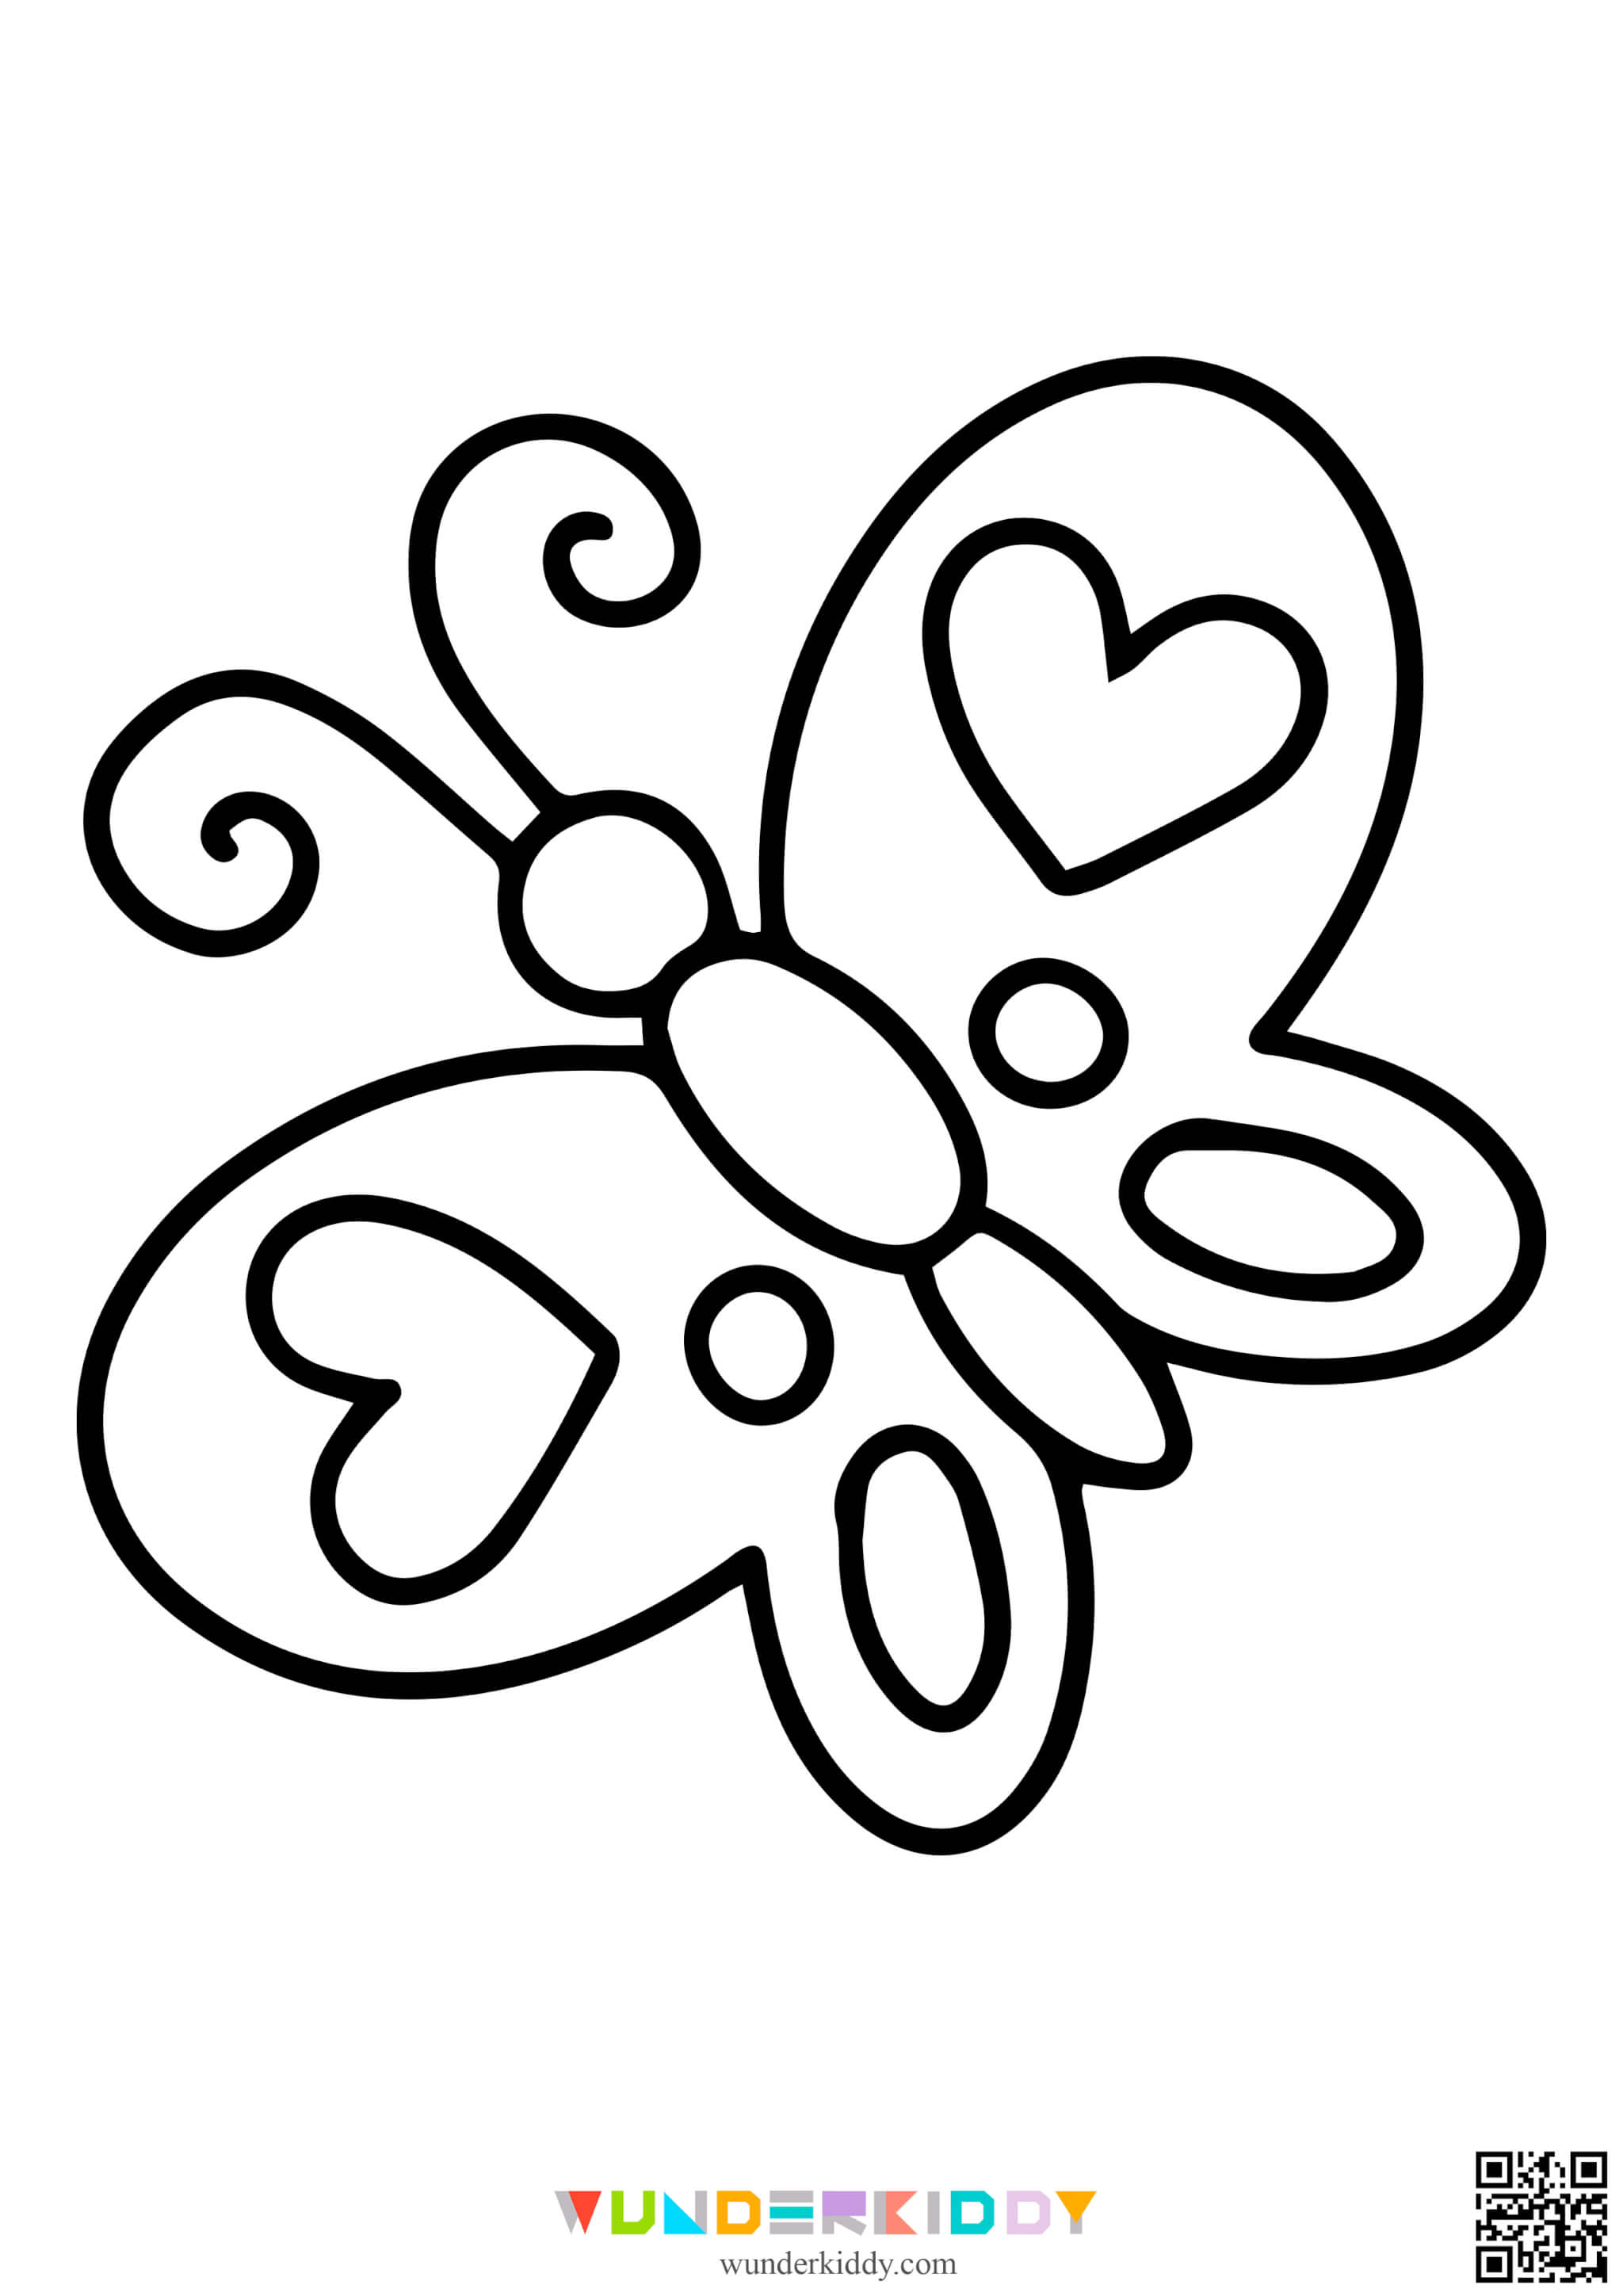 Spring Coloring Pages - Image 8